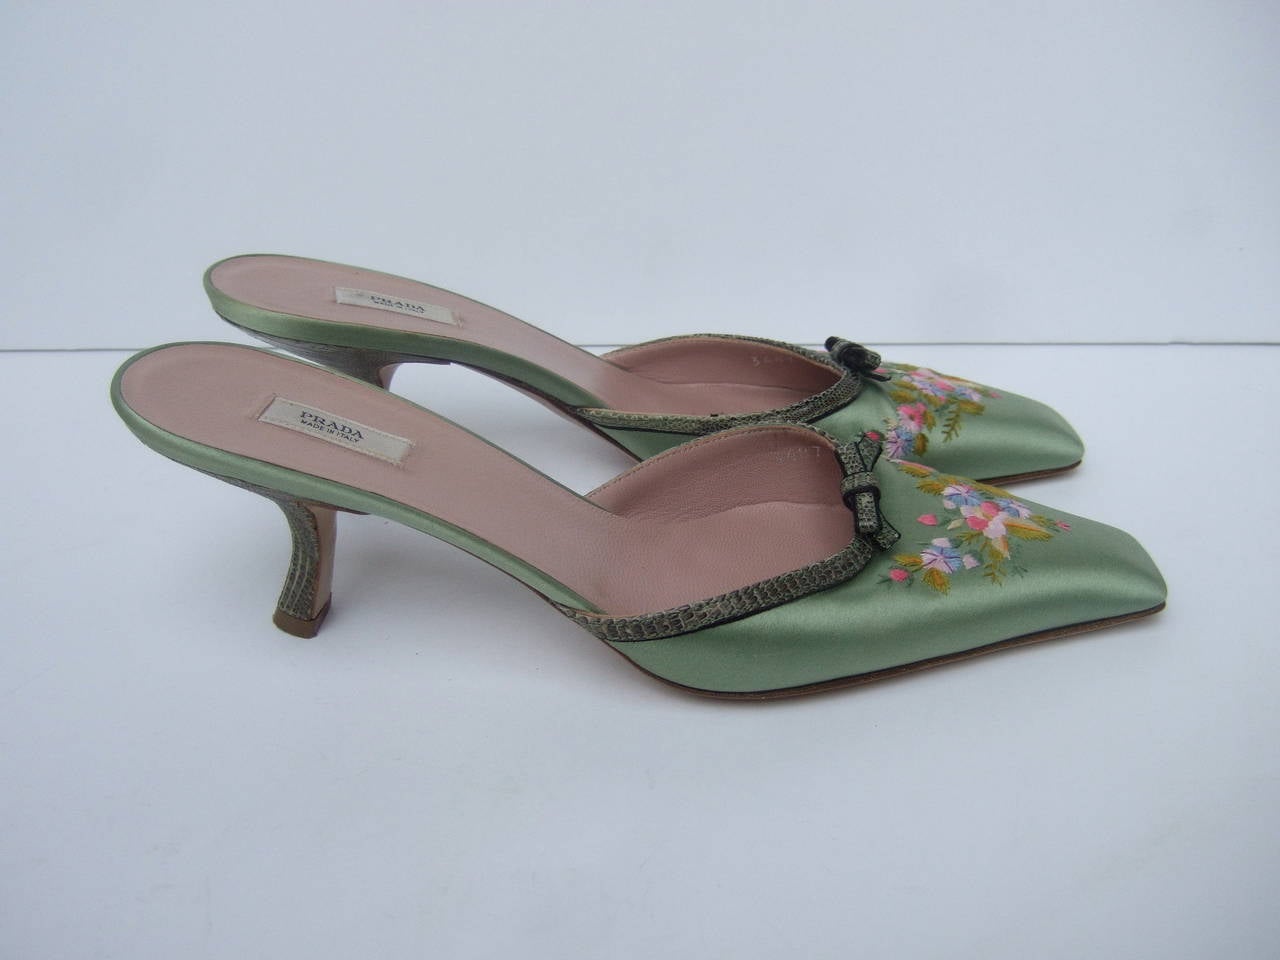 Gray Prada Mint Green Satin Embroidered Mules Size 37.5 Made in Italy